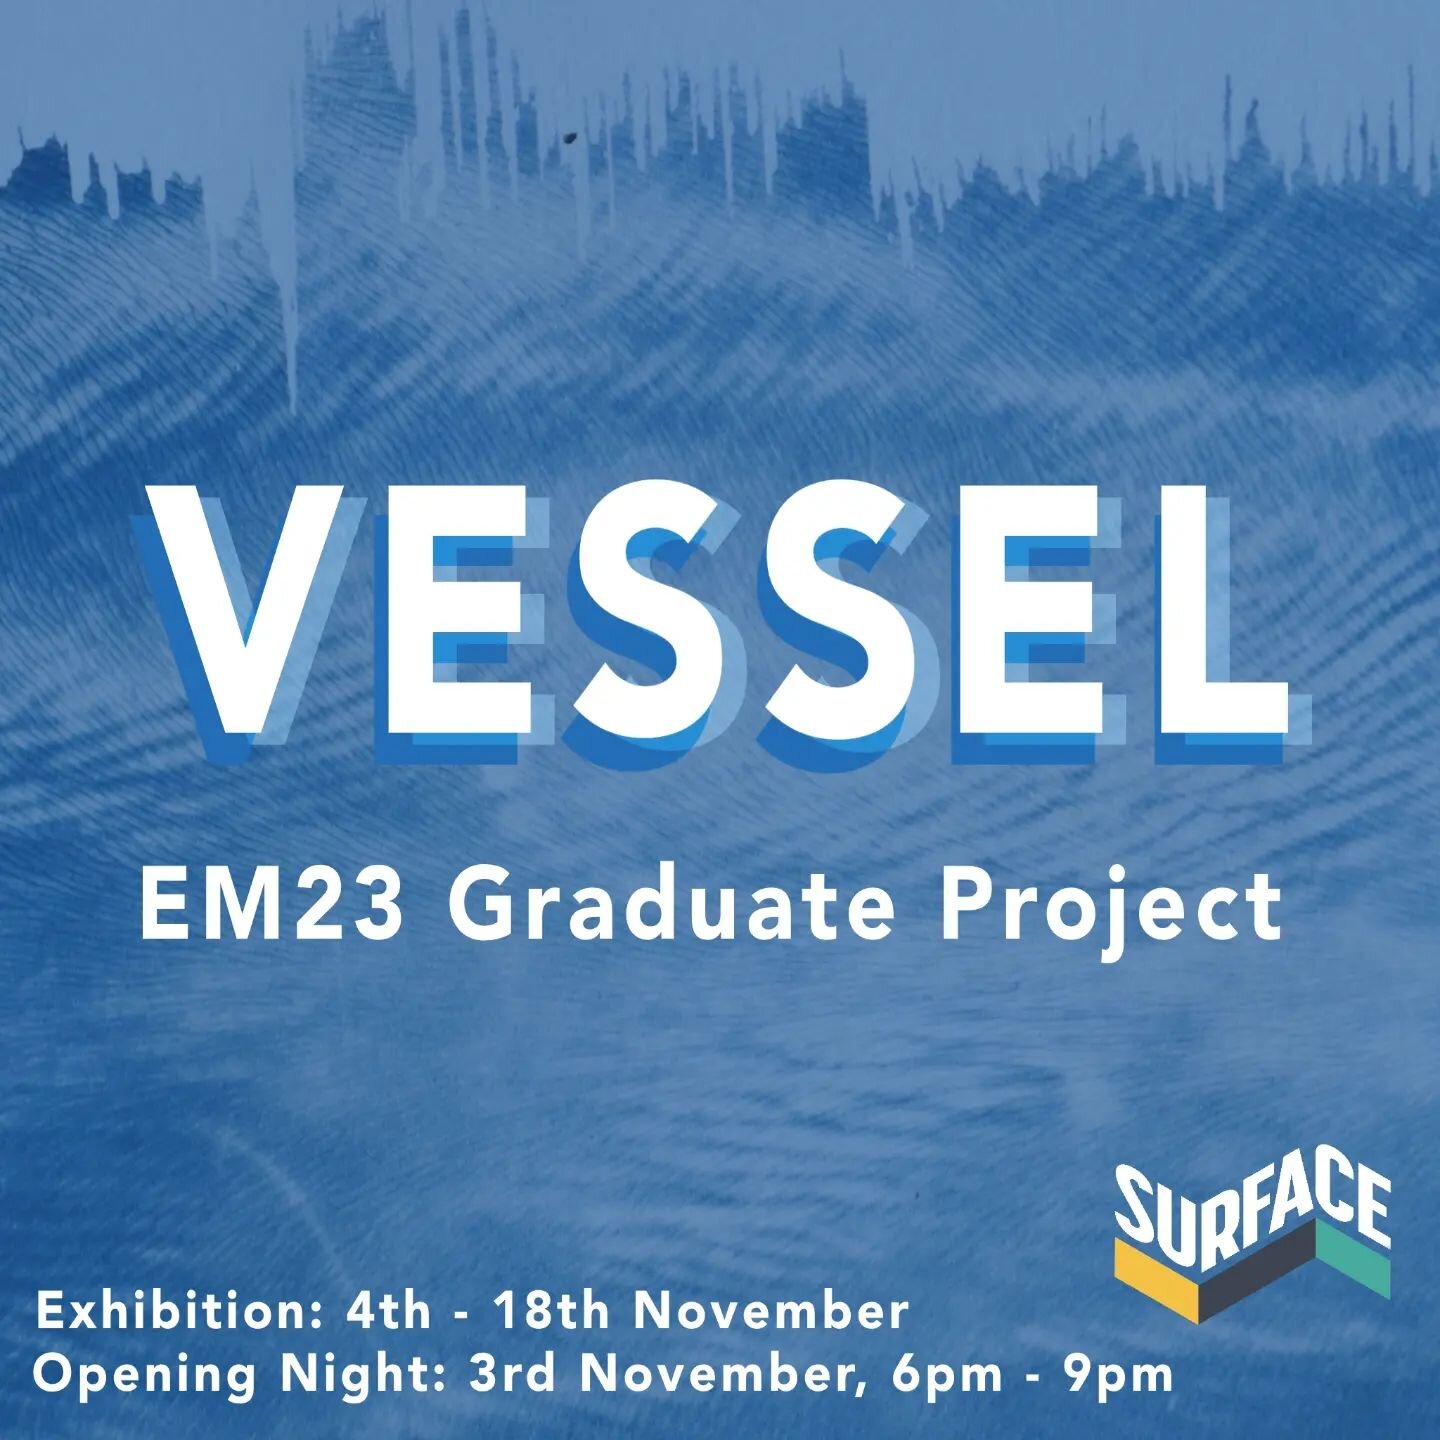 HELLO HOT AND GORGEOUS PEOPLE! I shall be exhibiting some gorgeous and devious work @surfacegallery between the 4th-18th of November, opening night 6-9pm on the 3rd!!! The exhibition is called 'Vessel' and there is gonna be some really slay work show